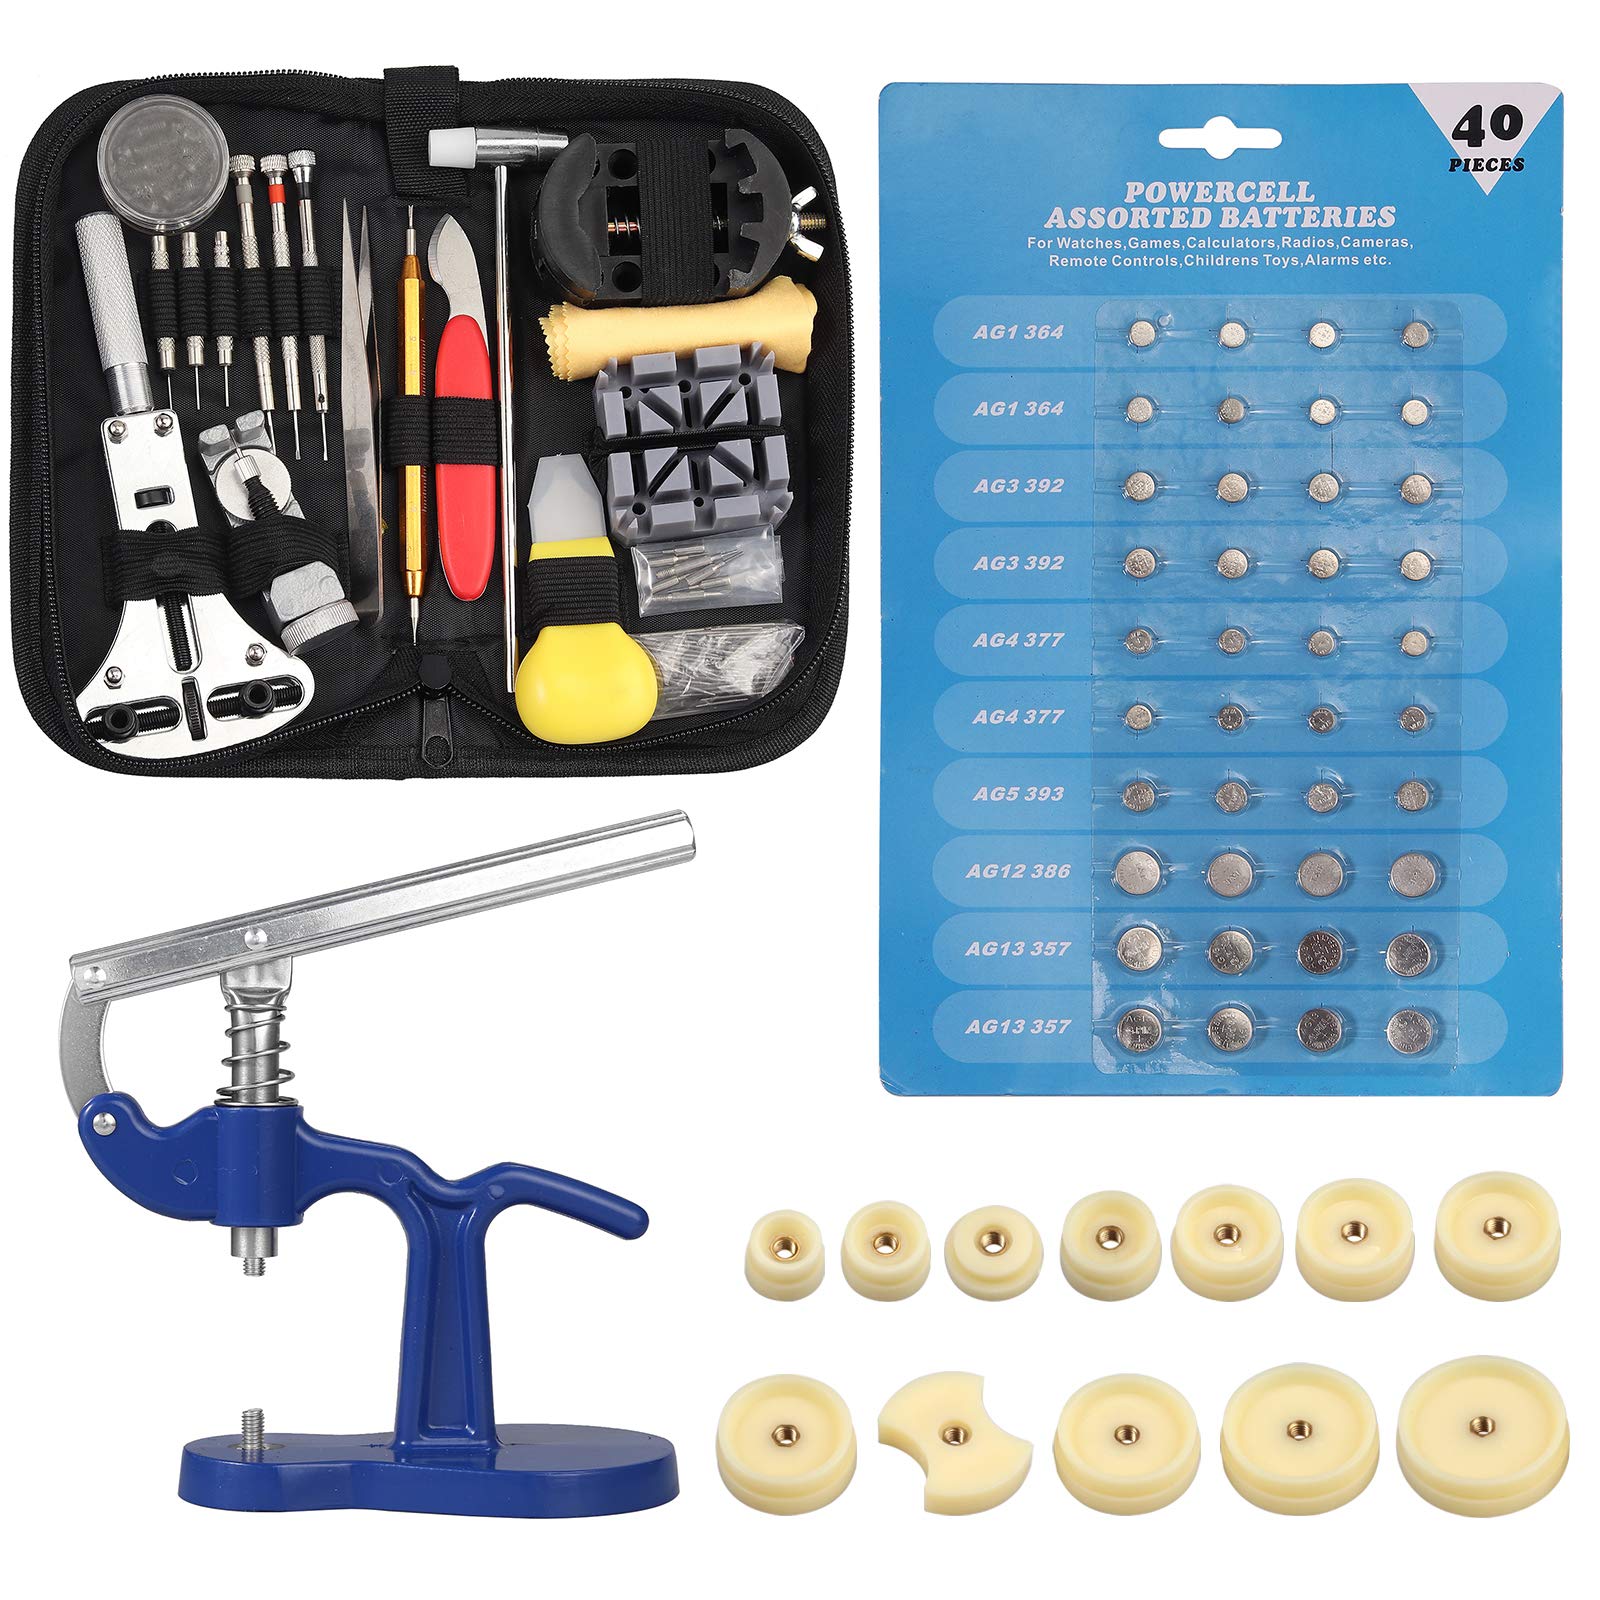 Justech Complete 204-Piece Watch Repair Kit with Batteries, Watch Battery Replacement Tool Watch Back Removal Tool Watch Band Adjustment Tool with Carrying Case